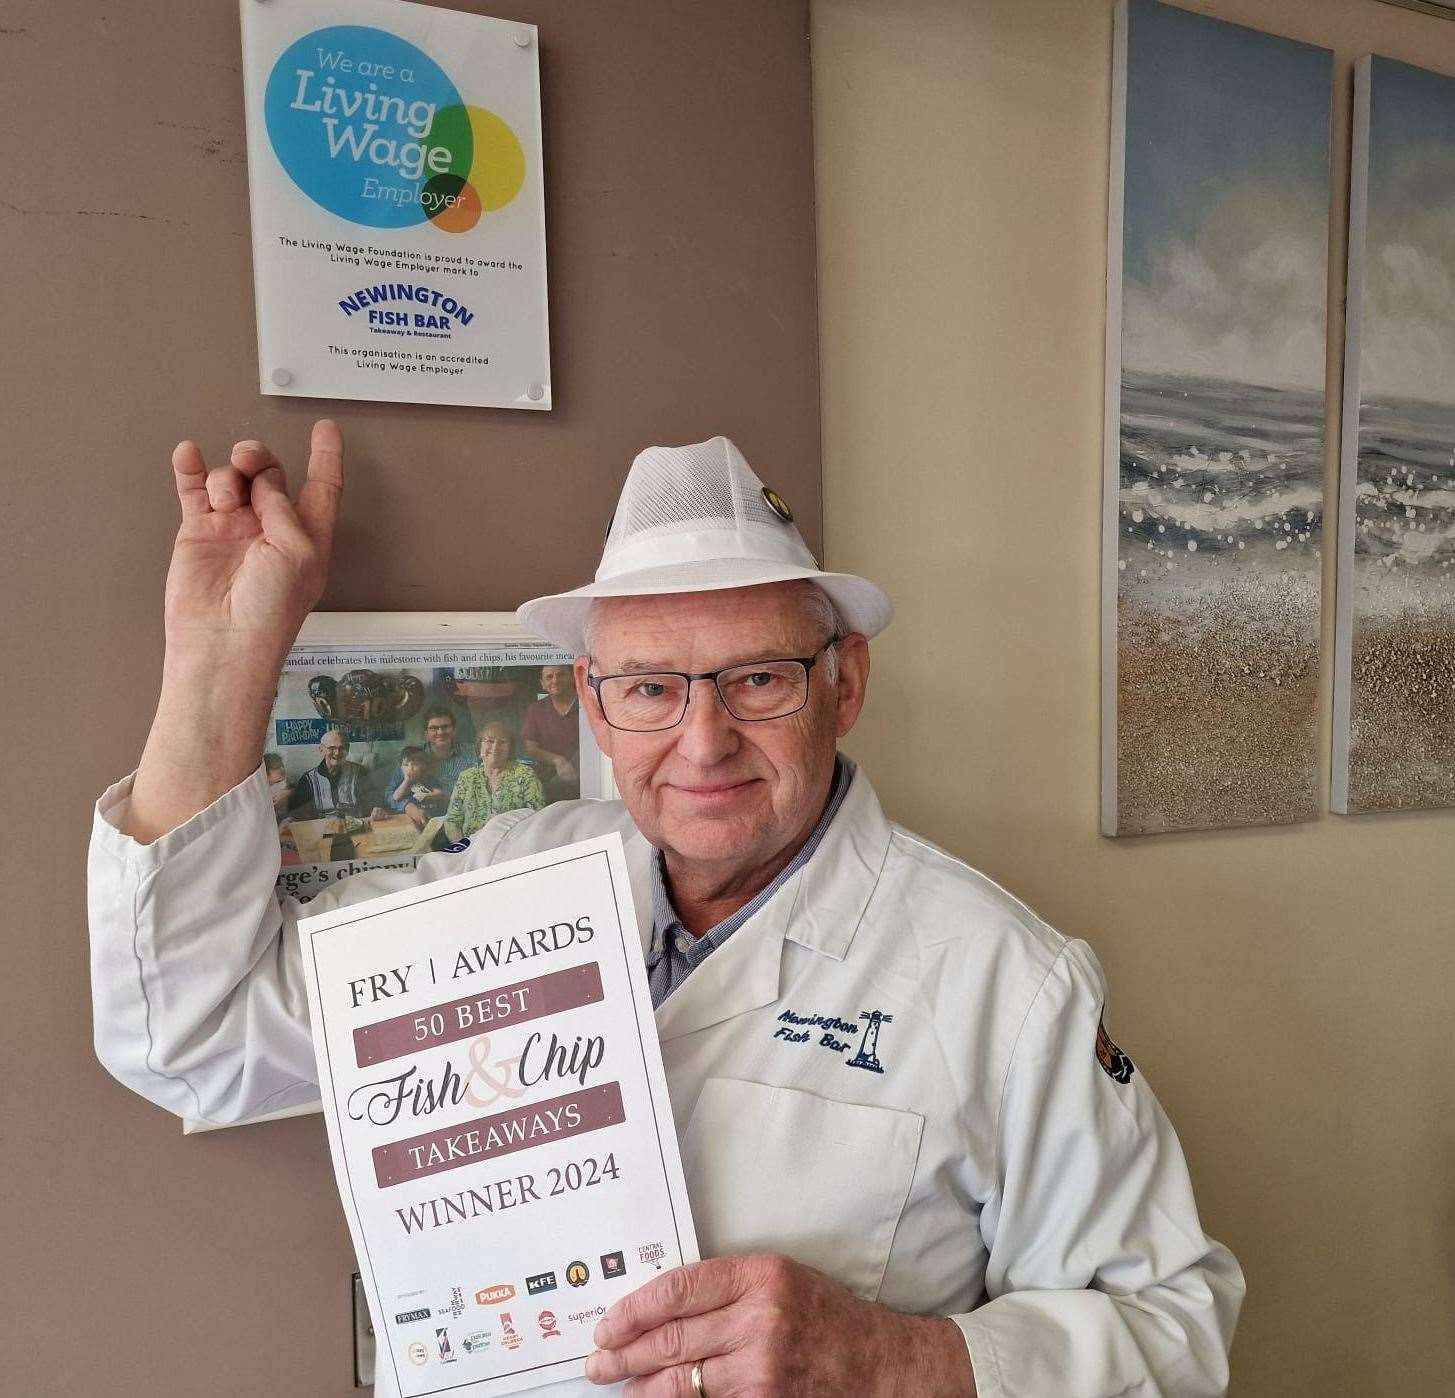 Newington Fish Bar owner Nigel Derrett was delighted with the accolade